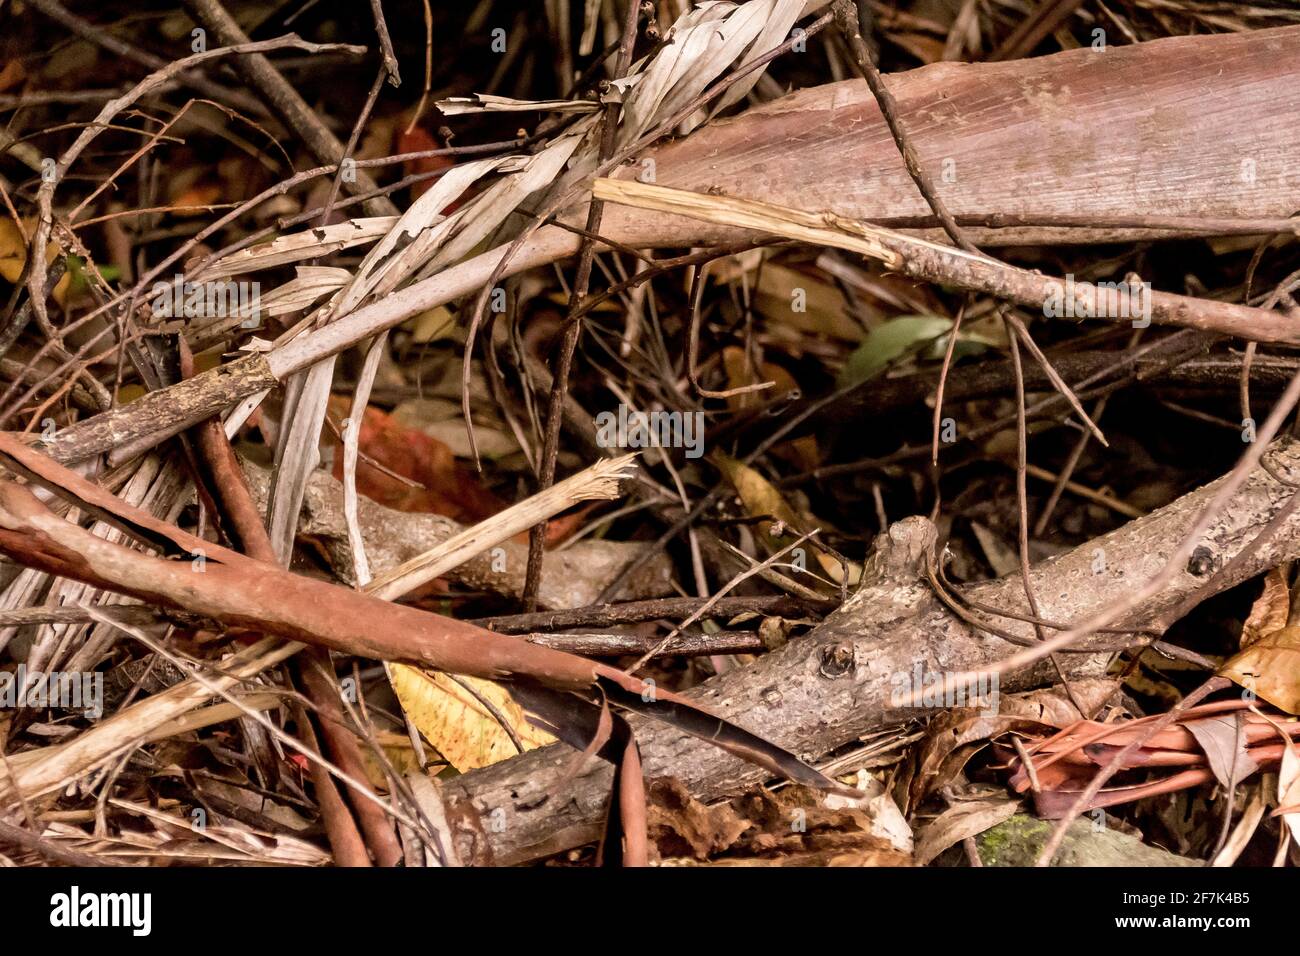 Organic debris on forest floor in Australian lowland subtropical rainforest in Queensland. Bark, leaves, fronds, form thick ground covering. Stock Photo